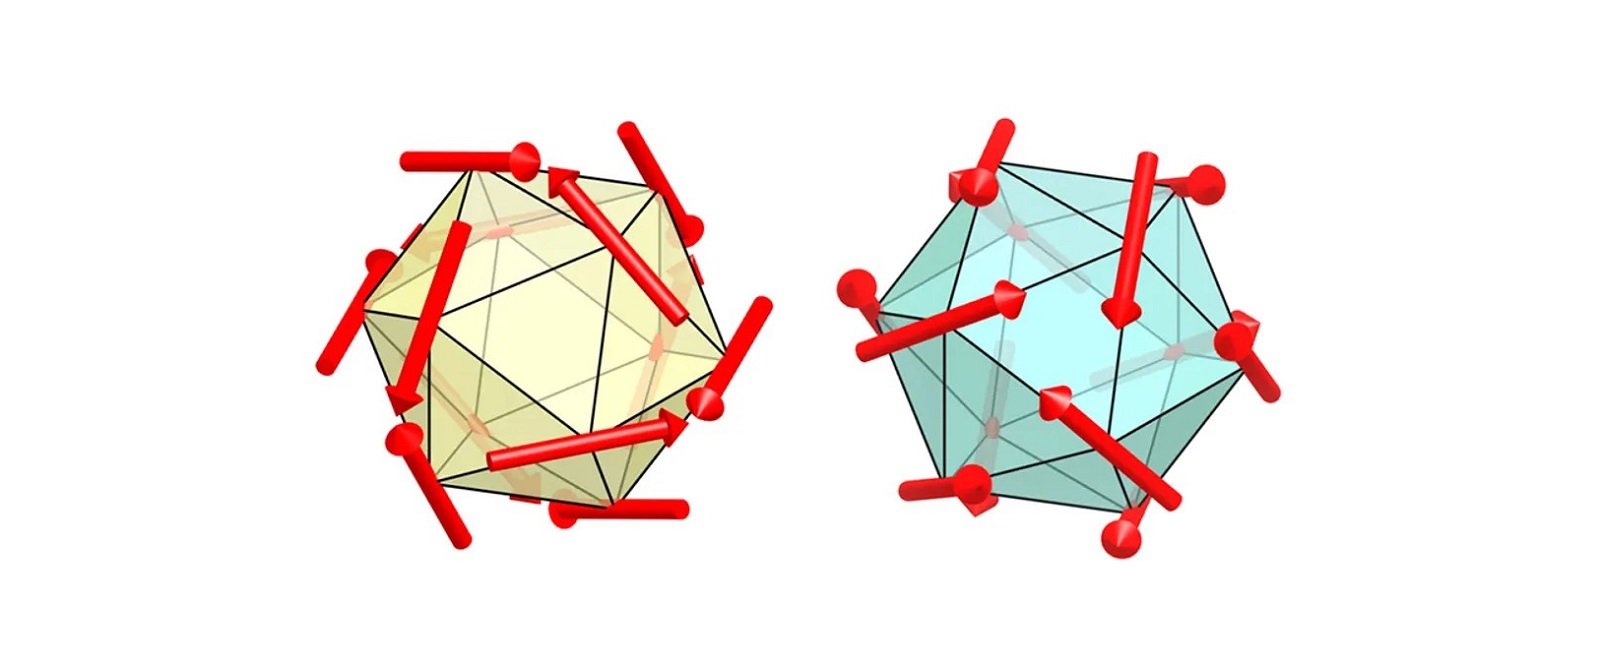 Quasicrystals show amazing changes in their properties.  A simple adjustment was enough